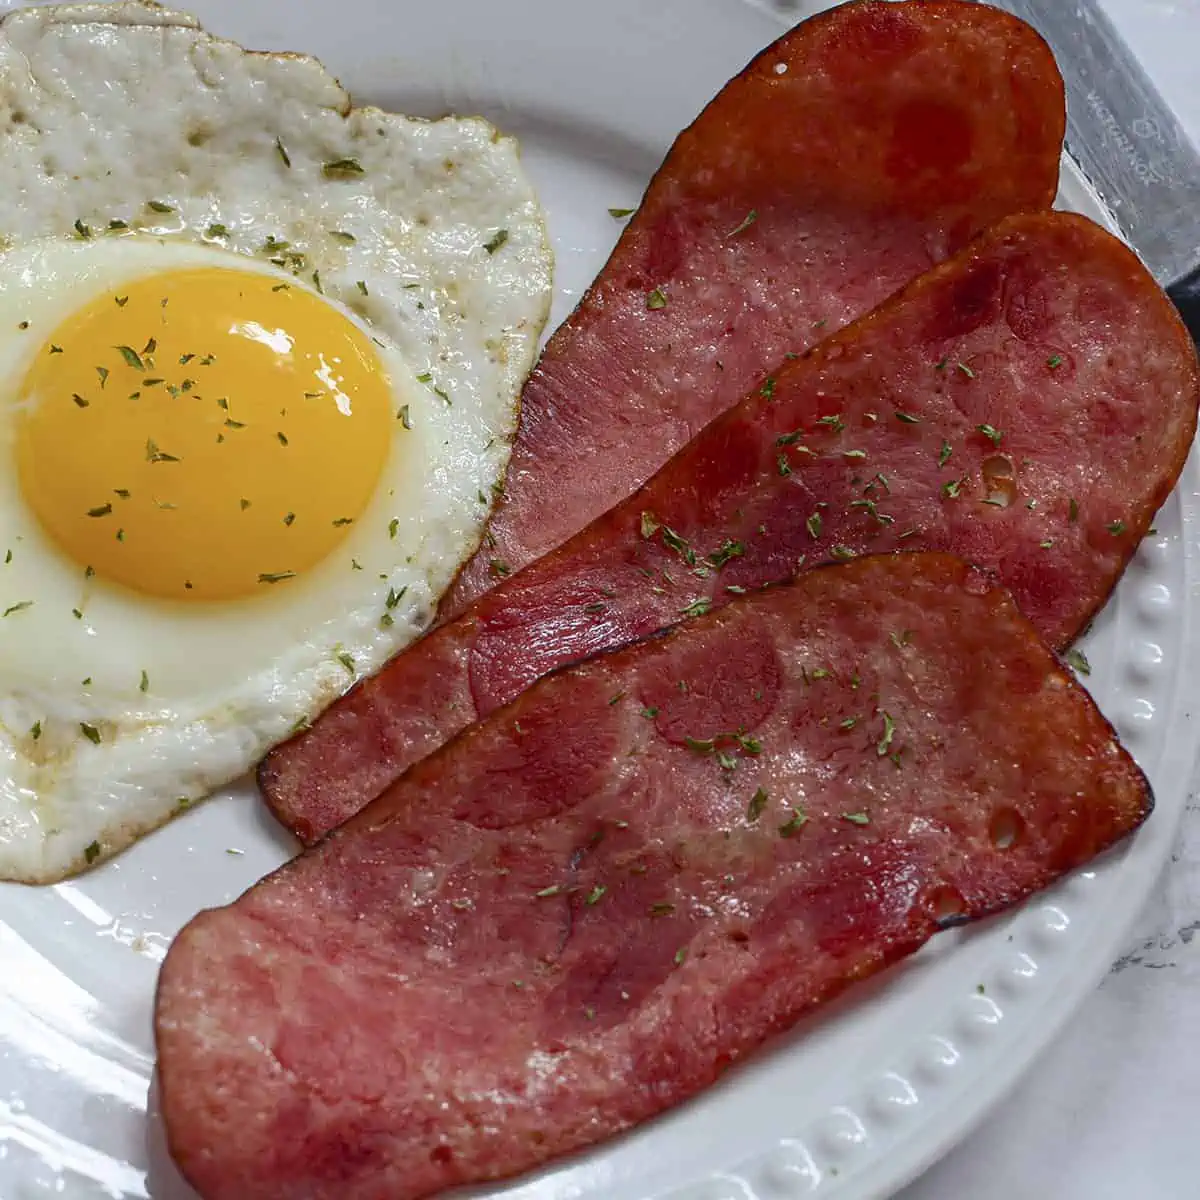 Cooked turkey bacon on a plate.